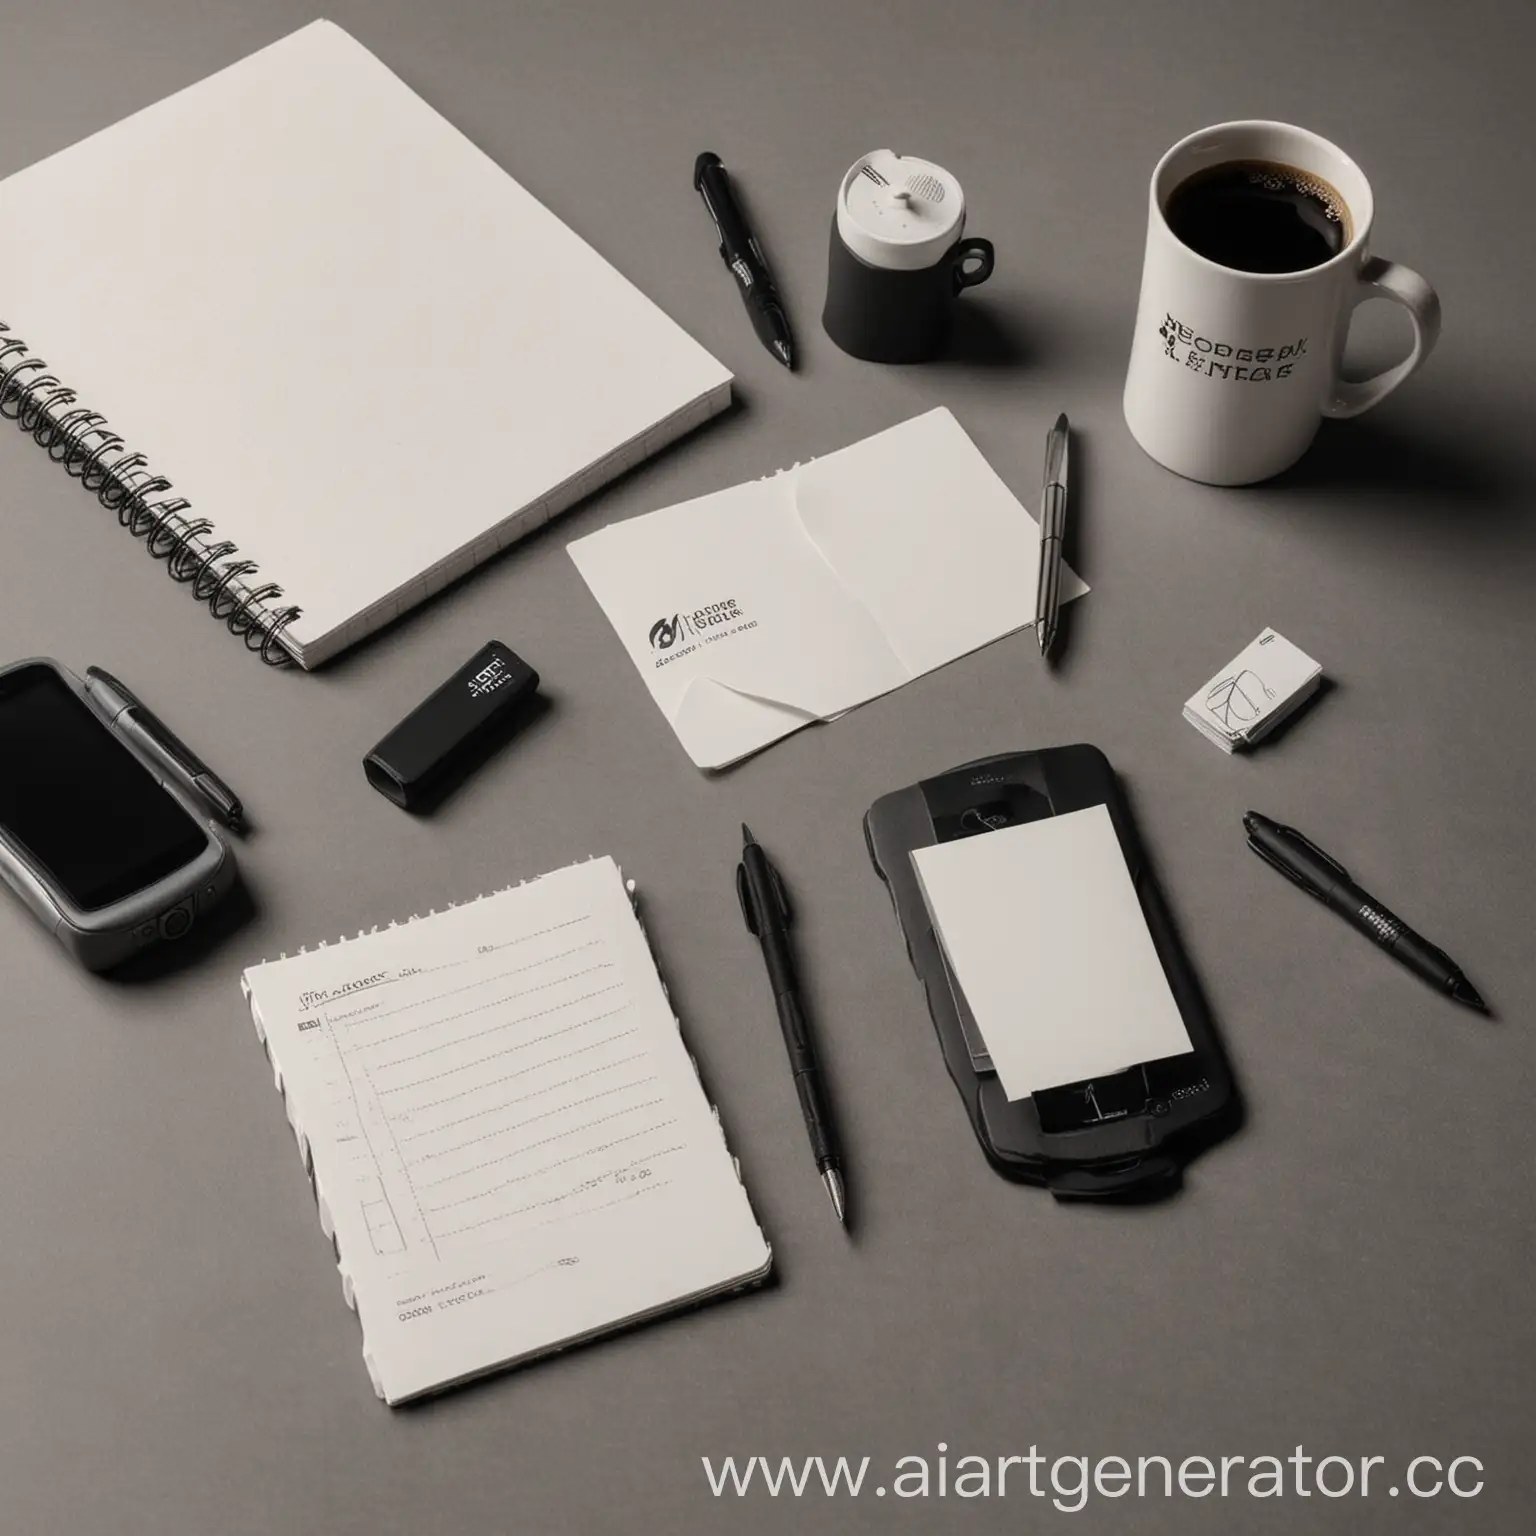 Professional-Branding-Creation-with-Mocap-Notebook-Coffee-Cup-Pen-and-Business-Card